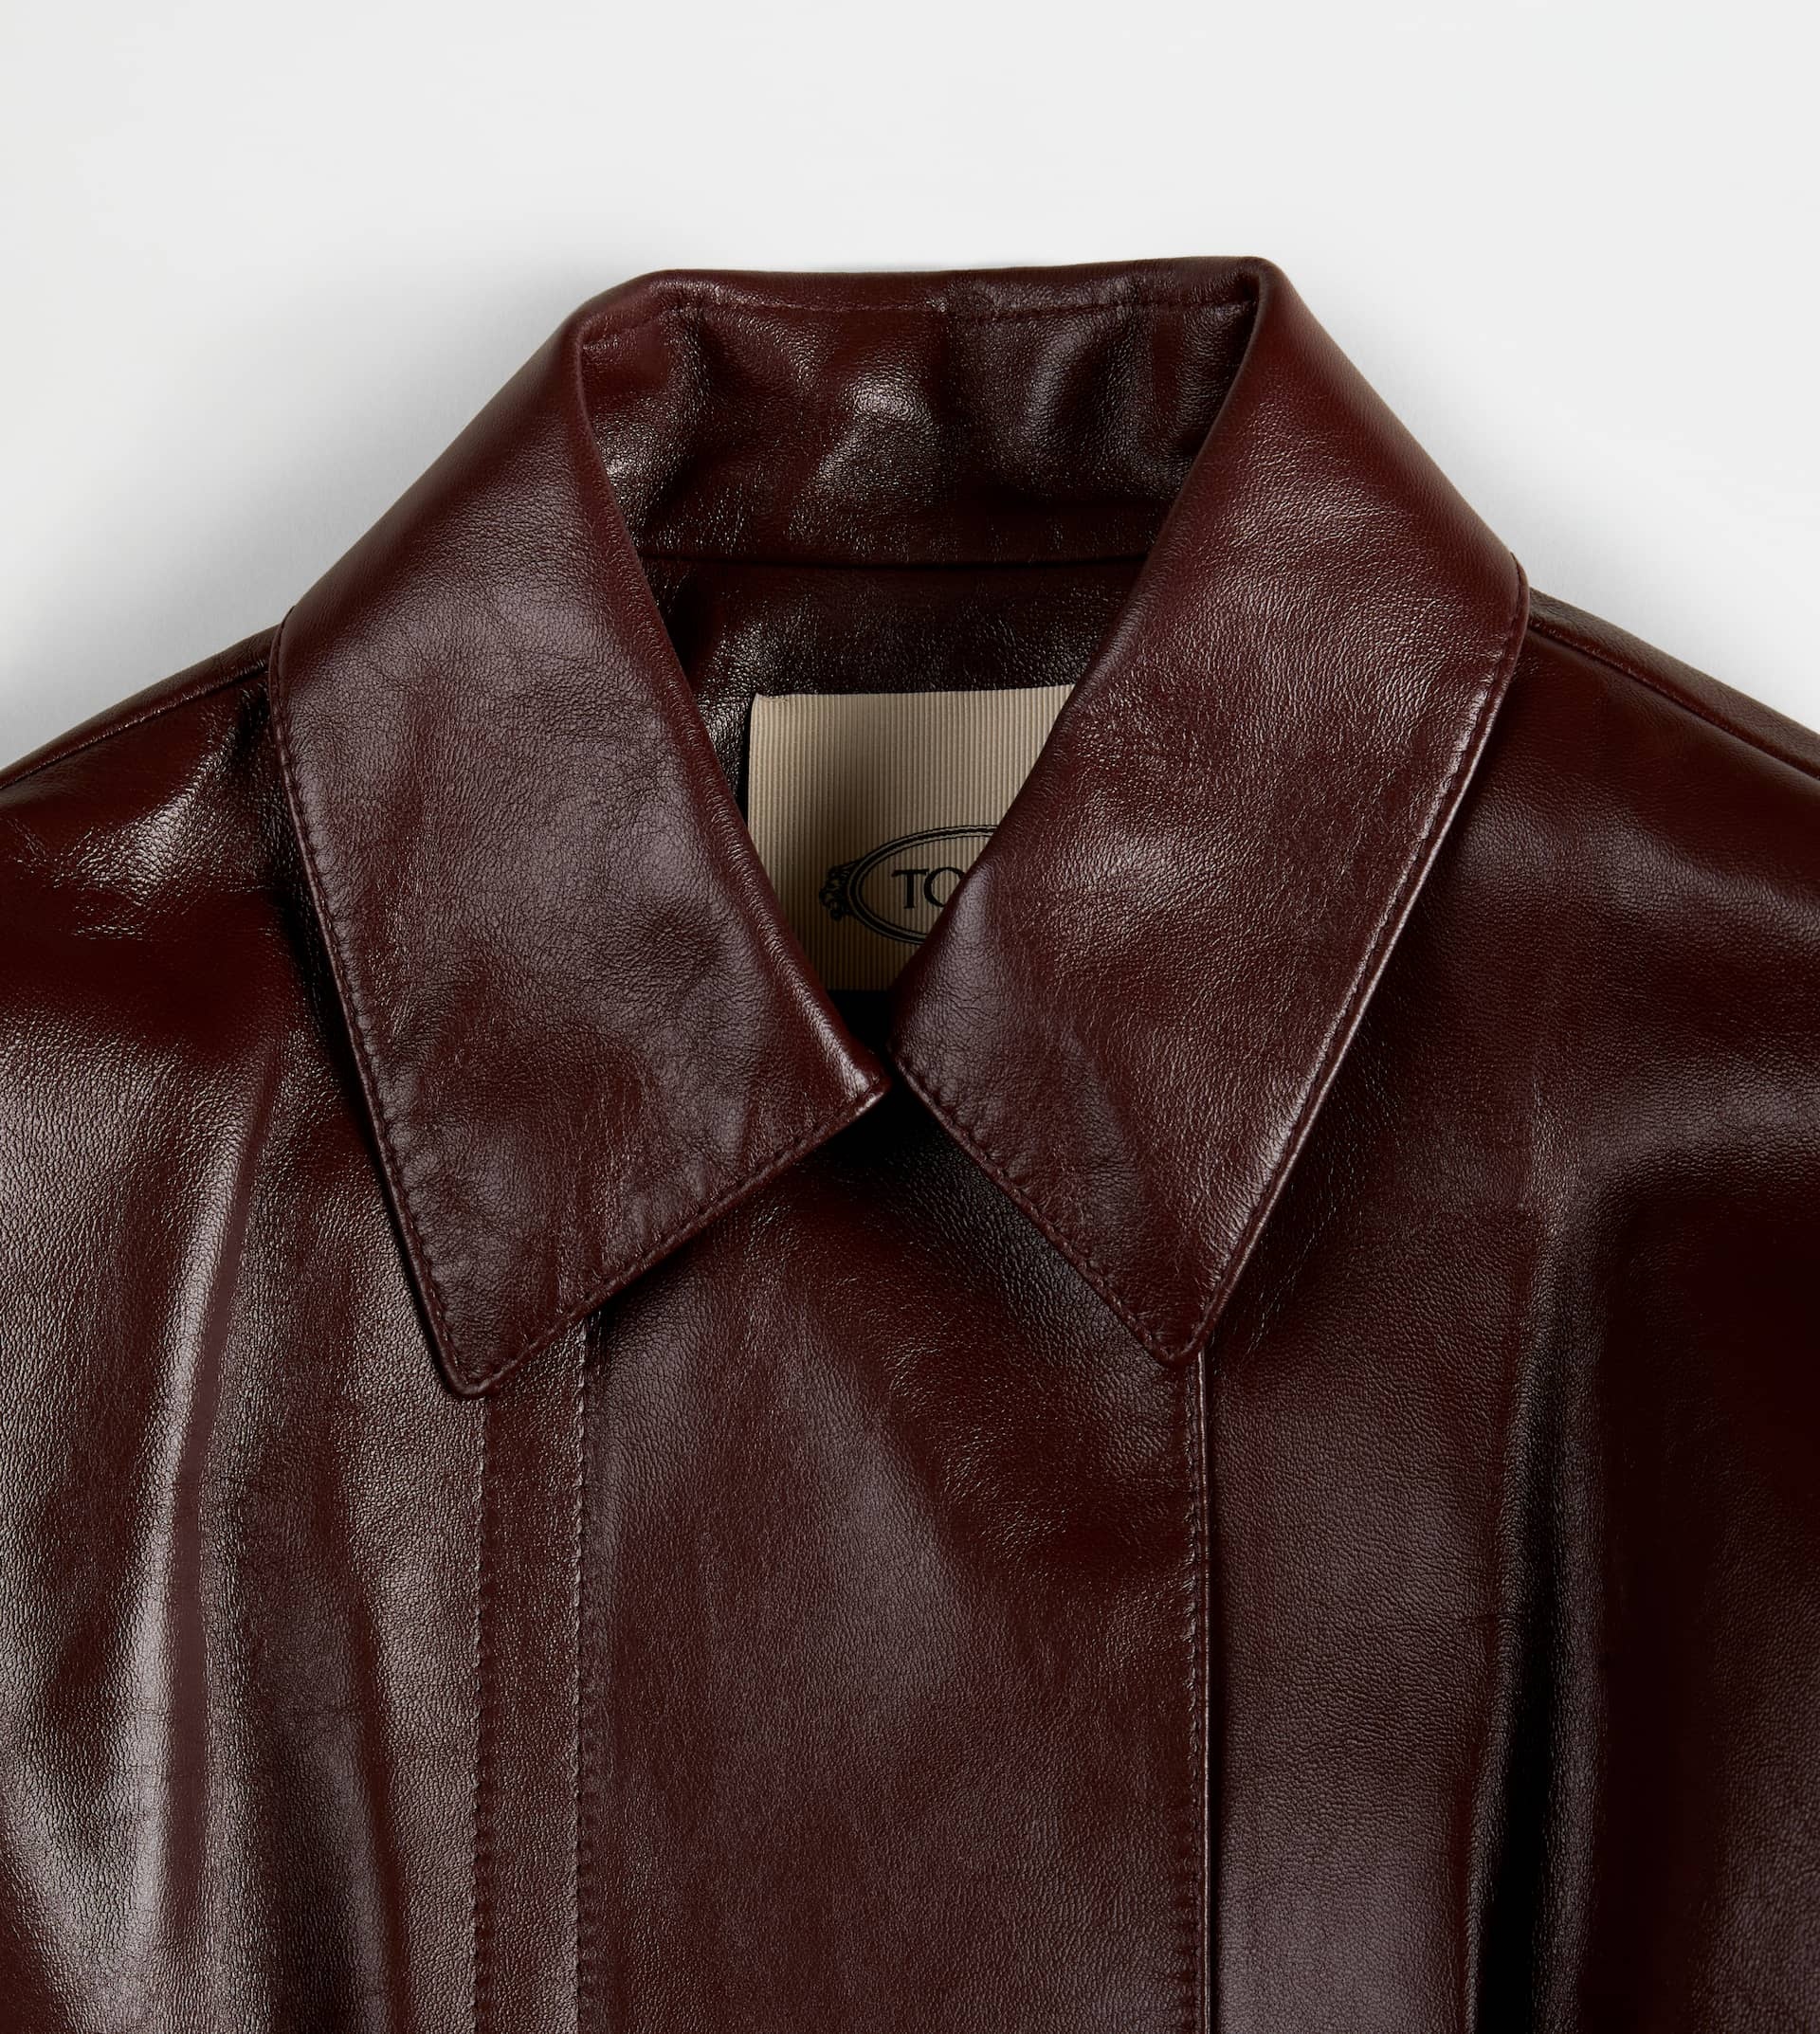 JACKET IN LEATHER - BROWN - 8